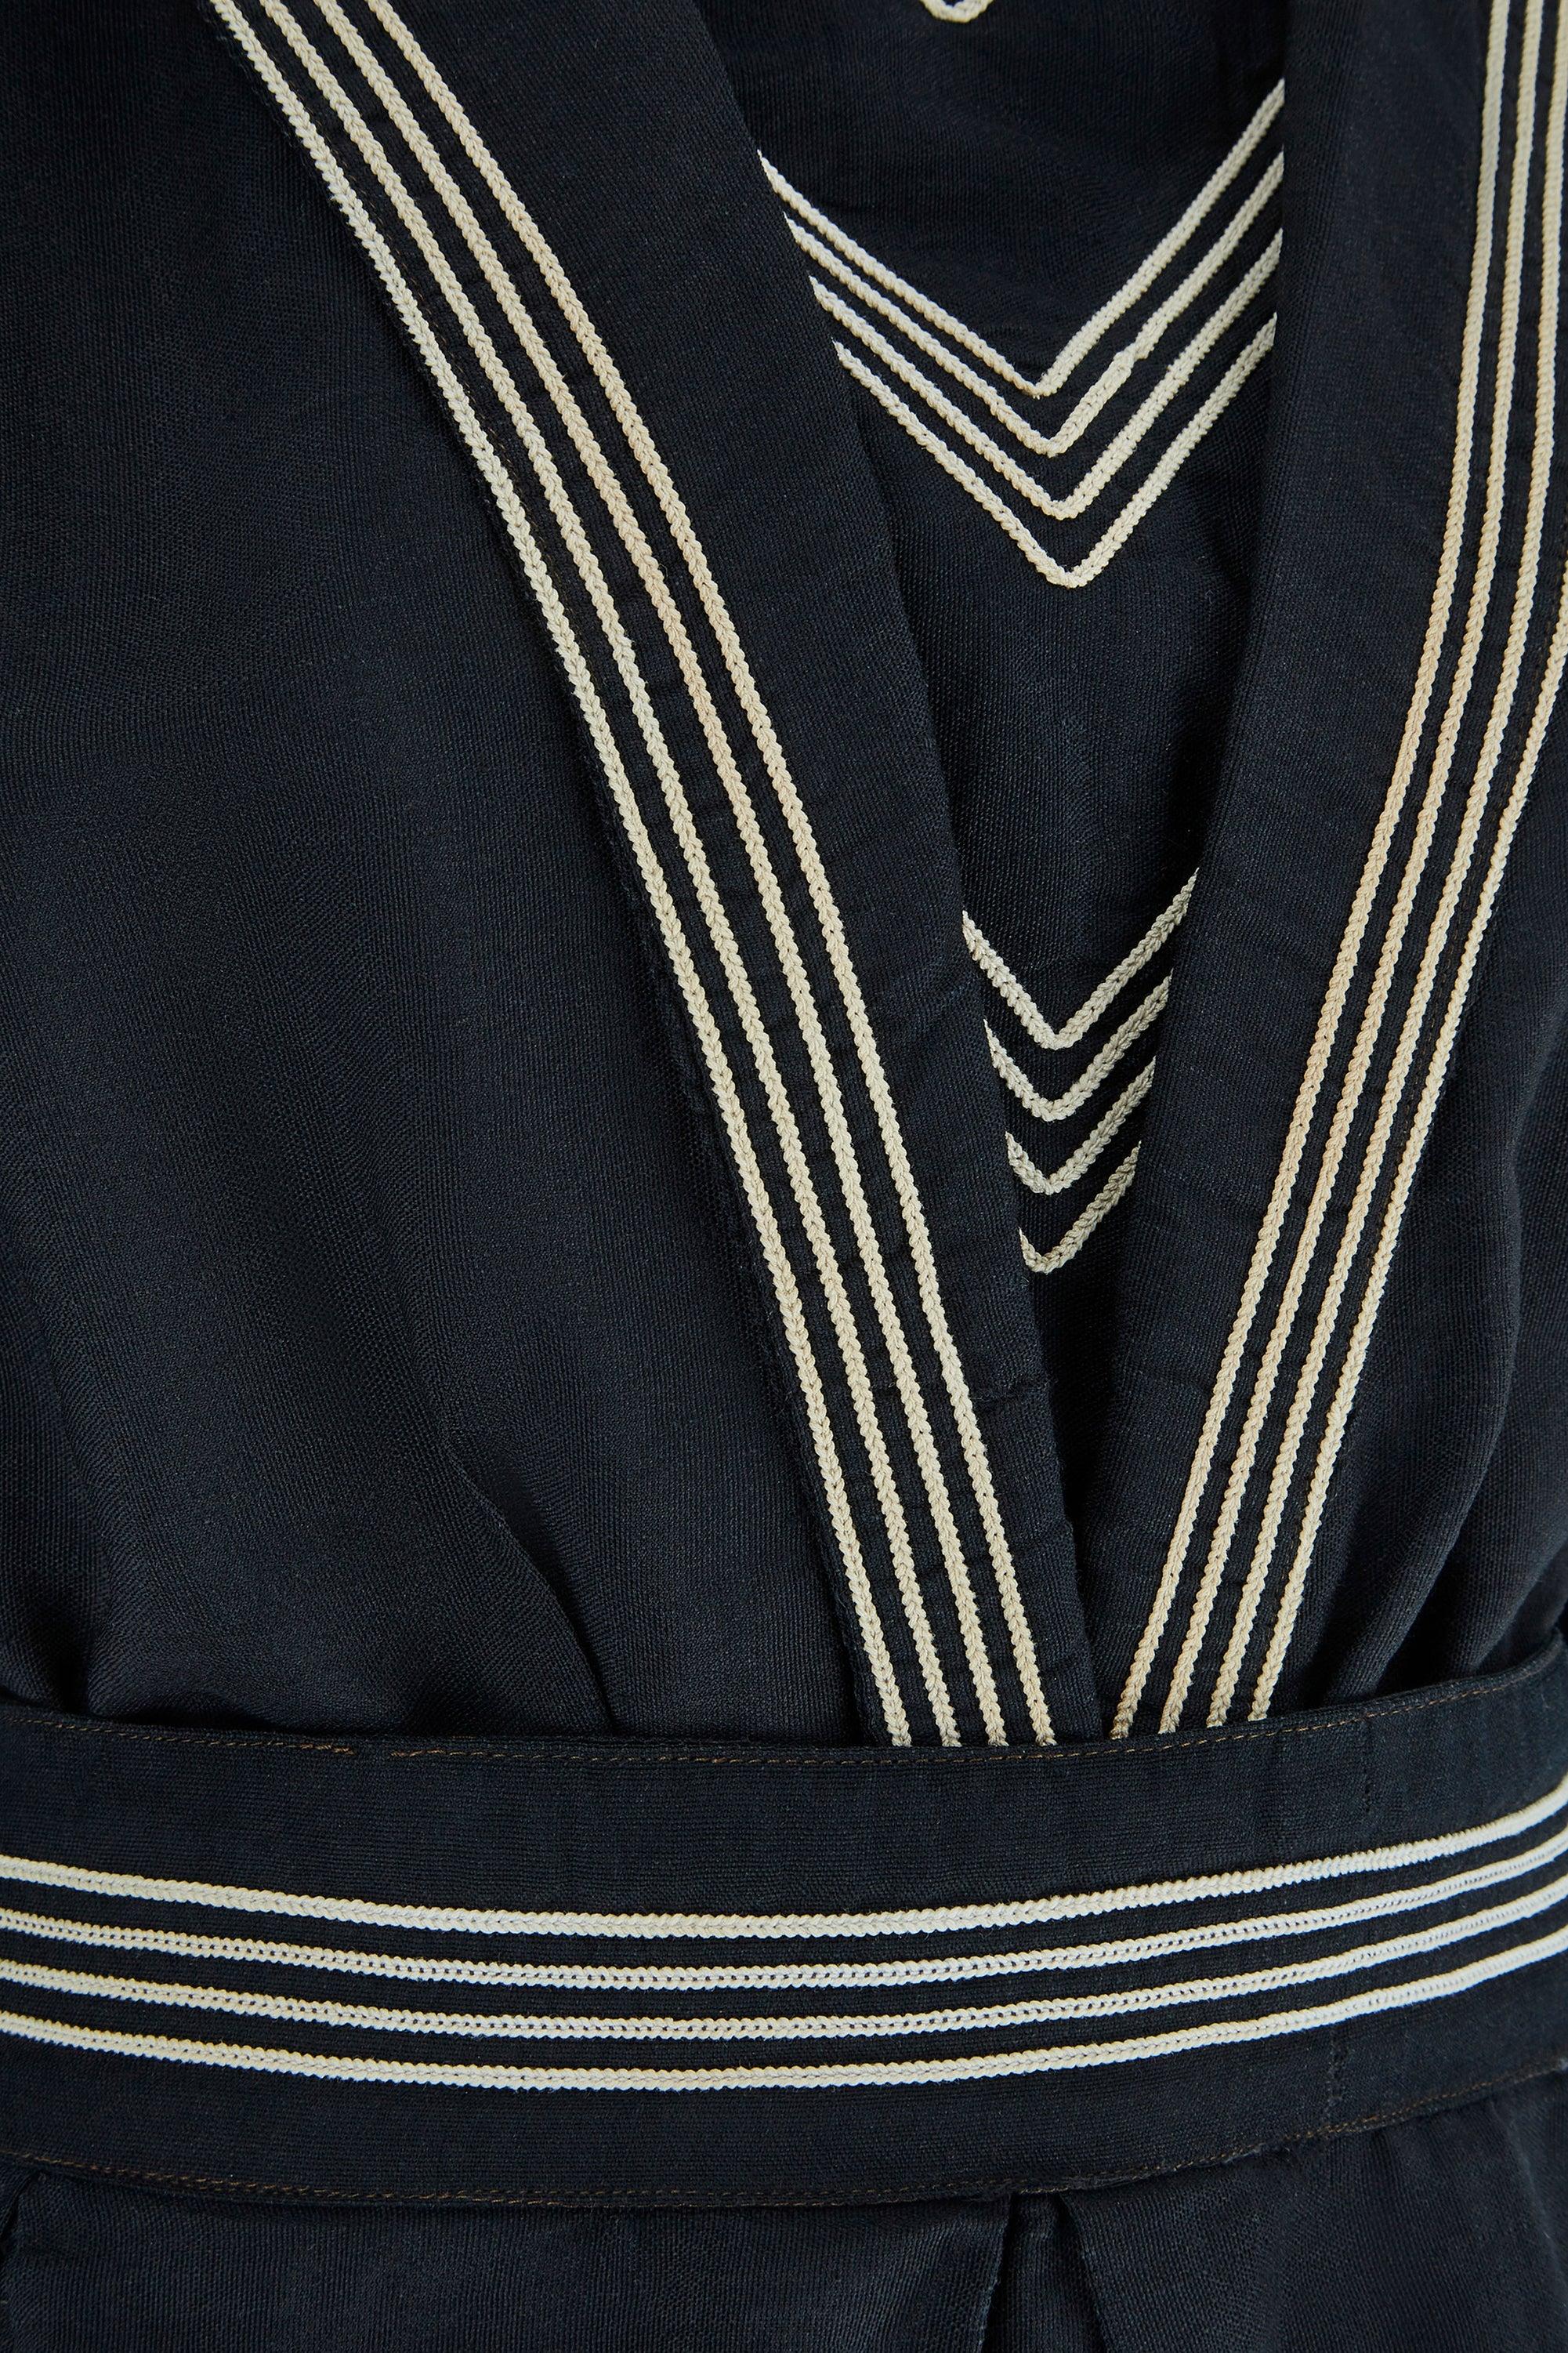 Women's 1900s Edwardian Navy and Cream Cotton Bathing Suit For Sale